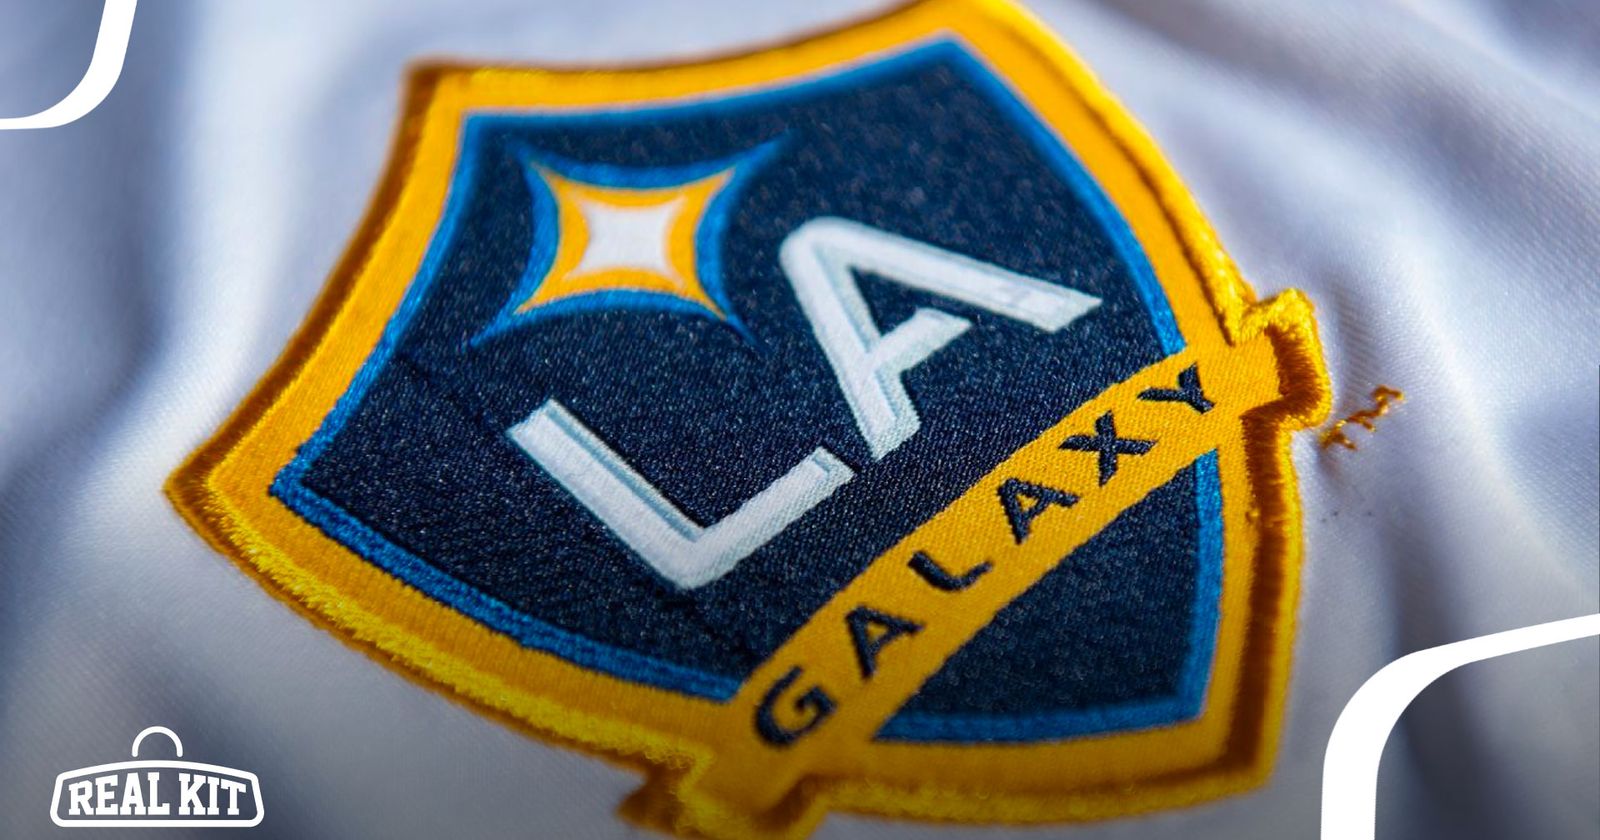 LA Galaxy dreaming big with 2022 home kit - LAG Confidential